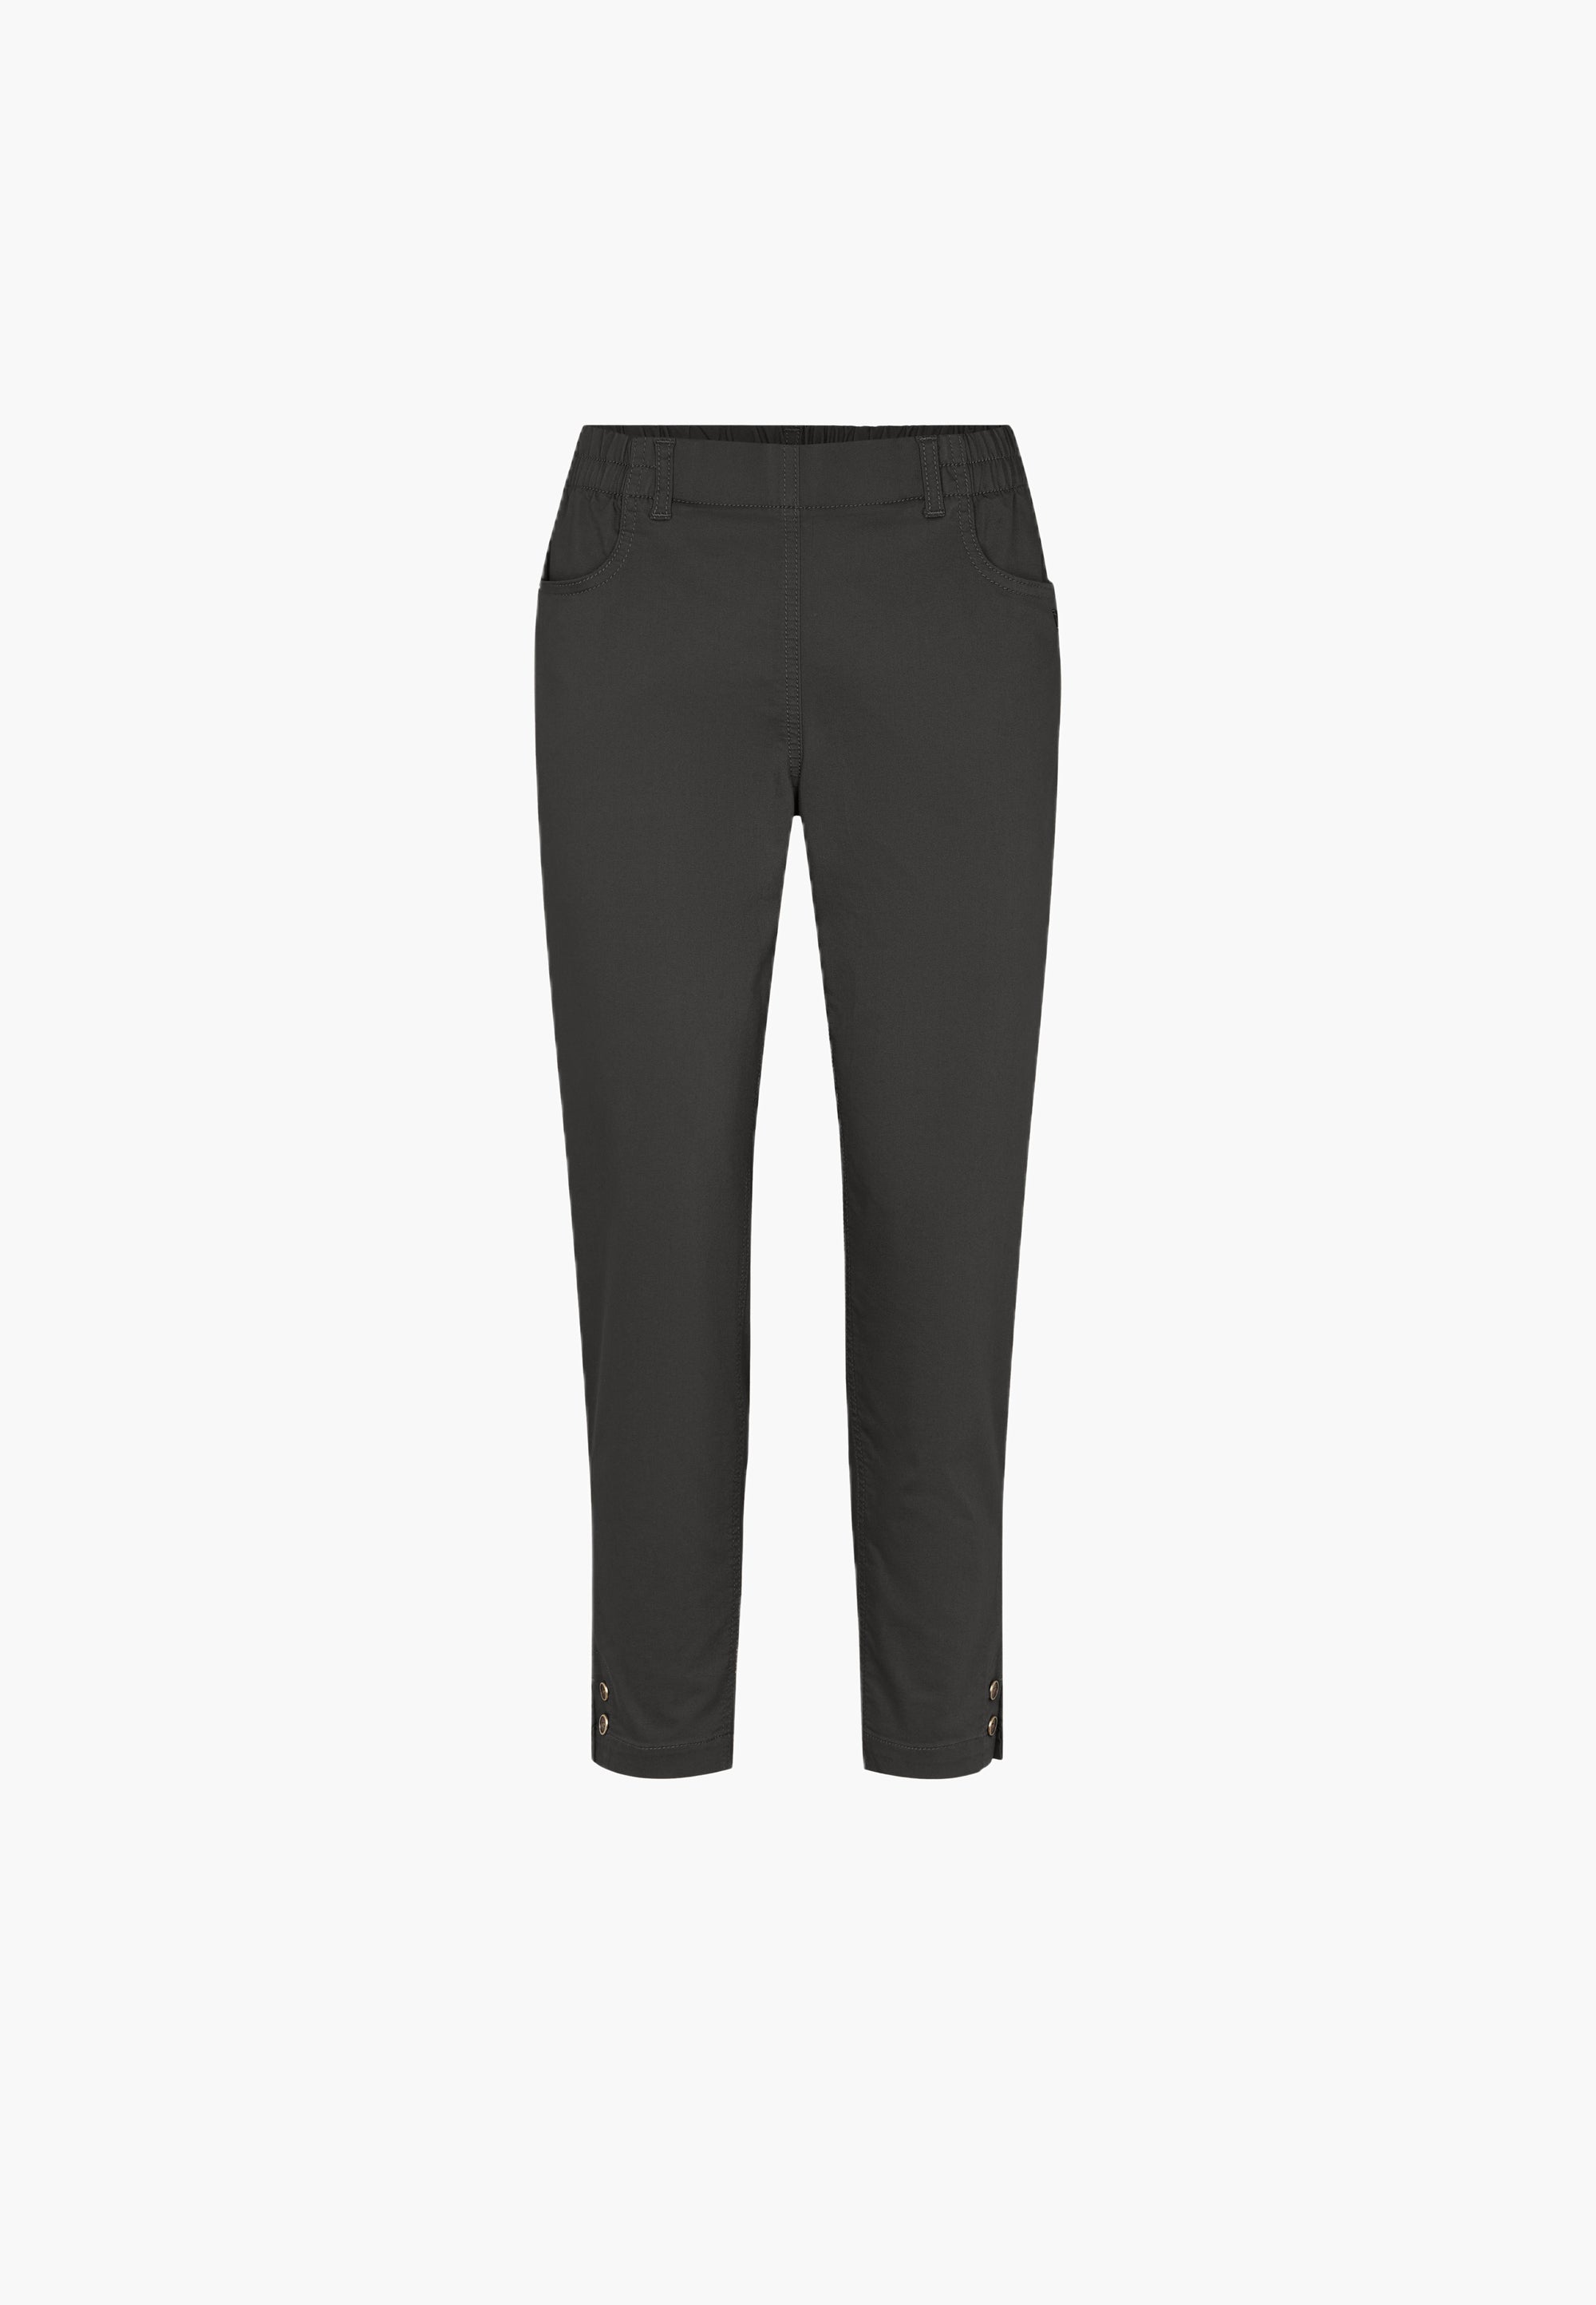 LAURIE  Ellie Relaxed - Extra Short Length Trousers RELAXED 99000 Black